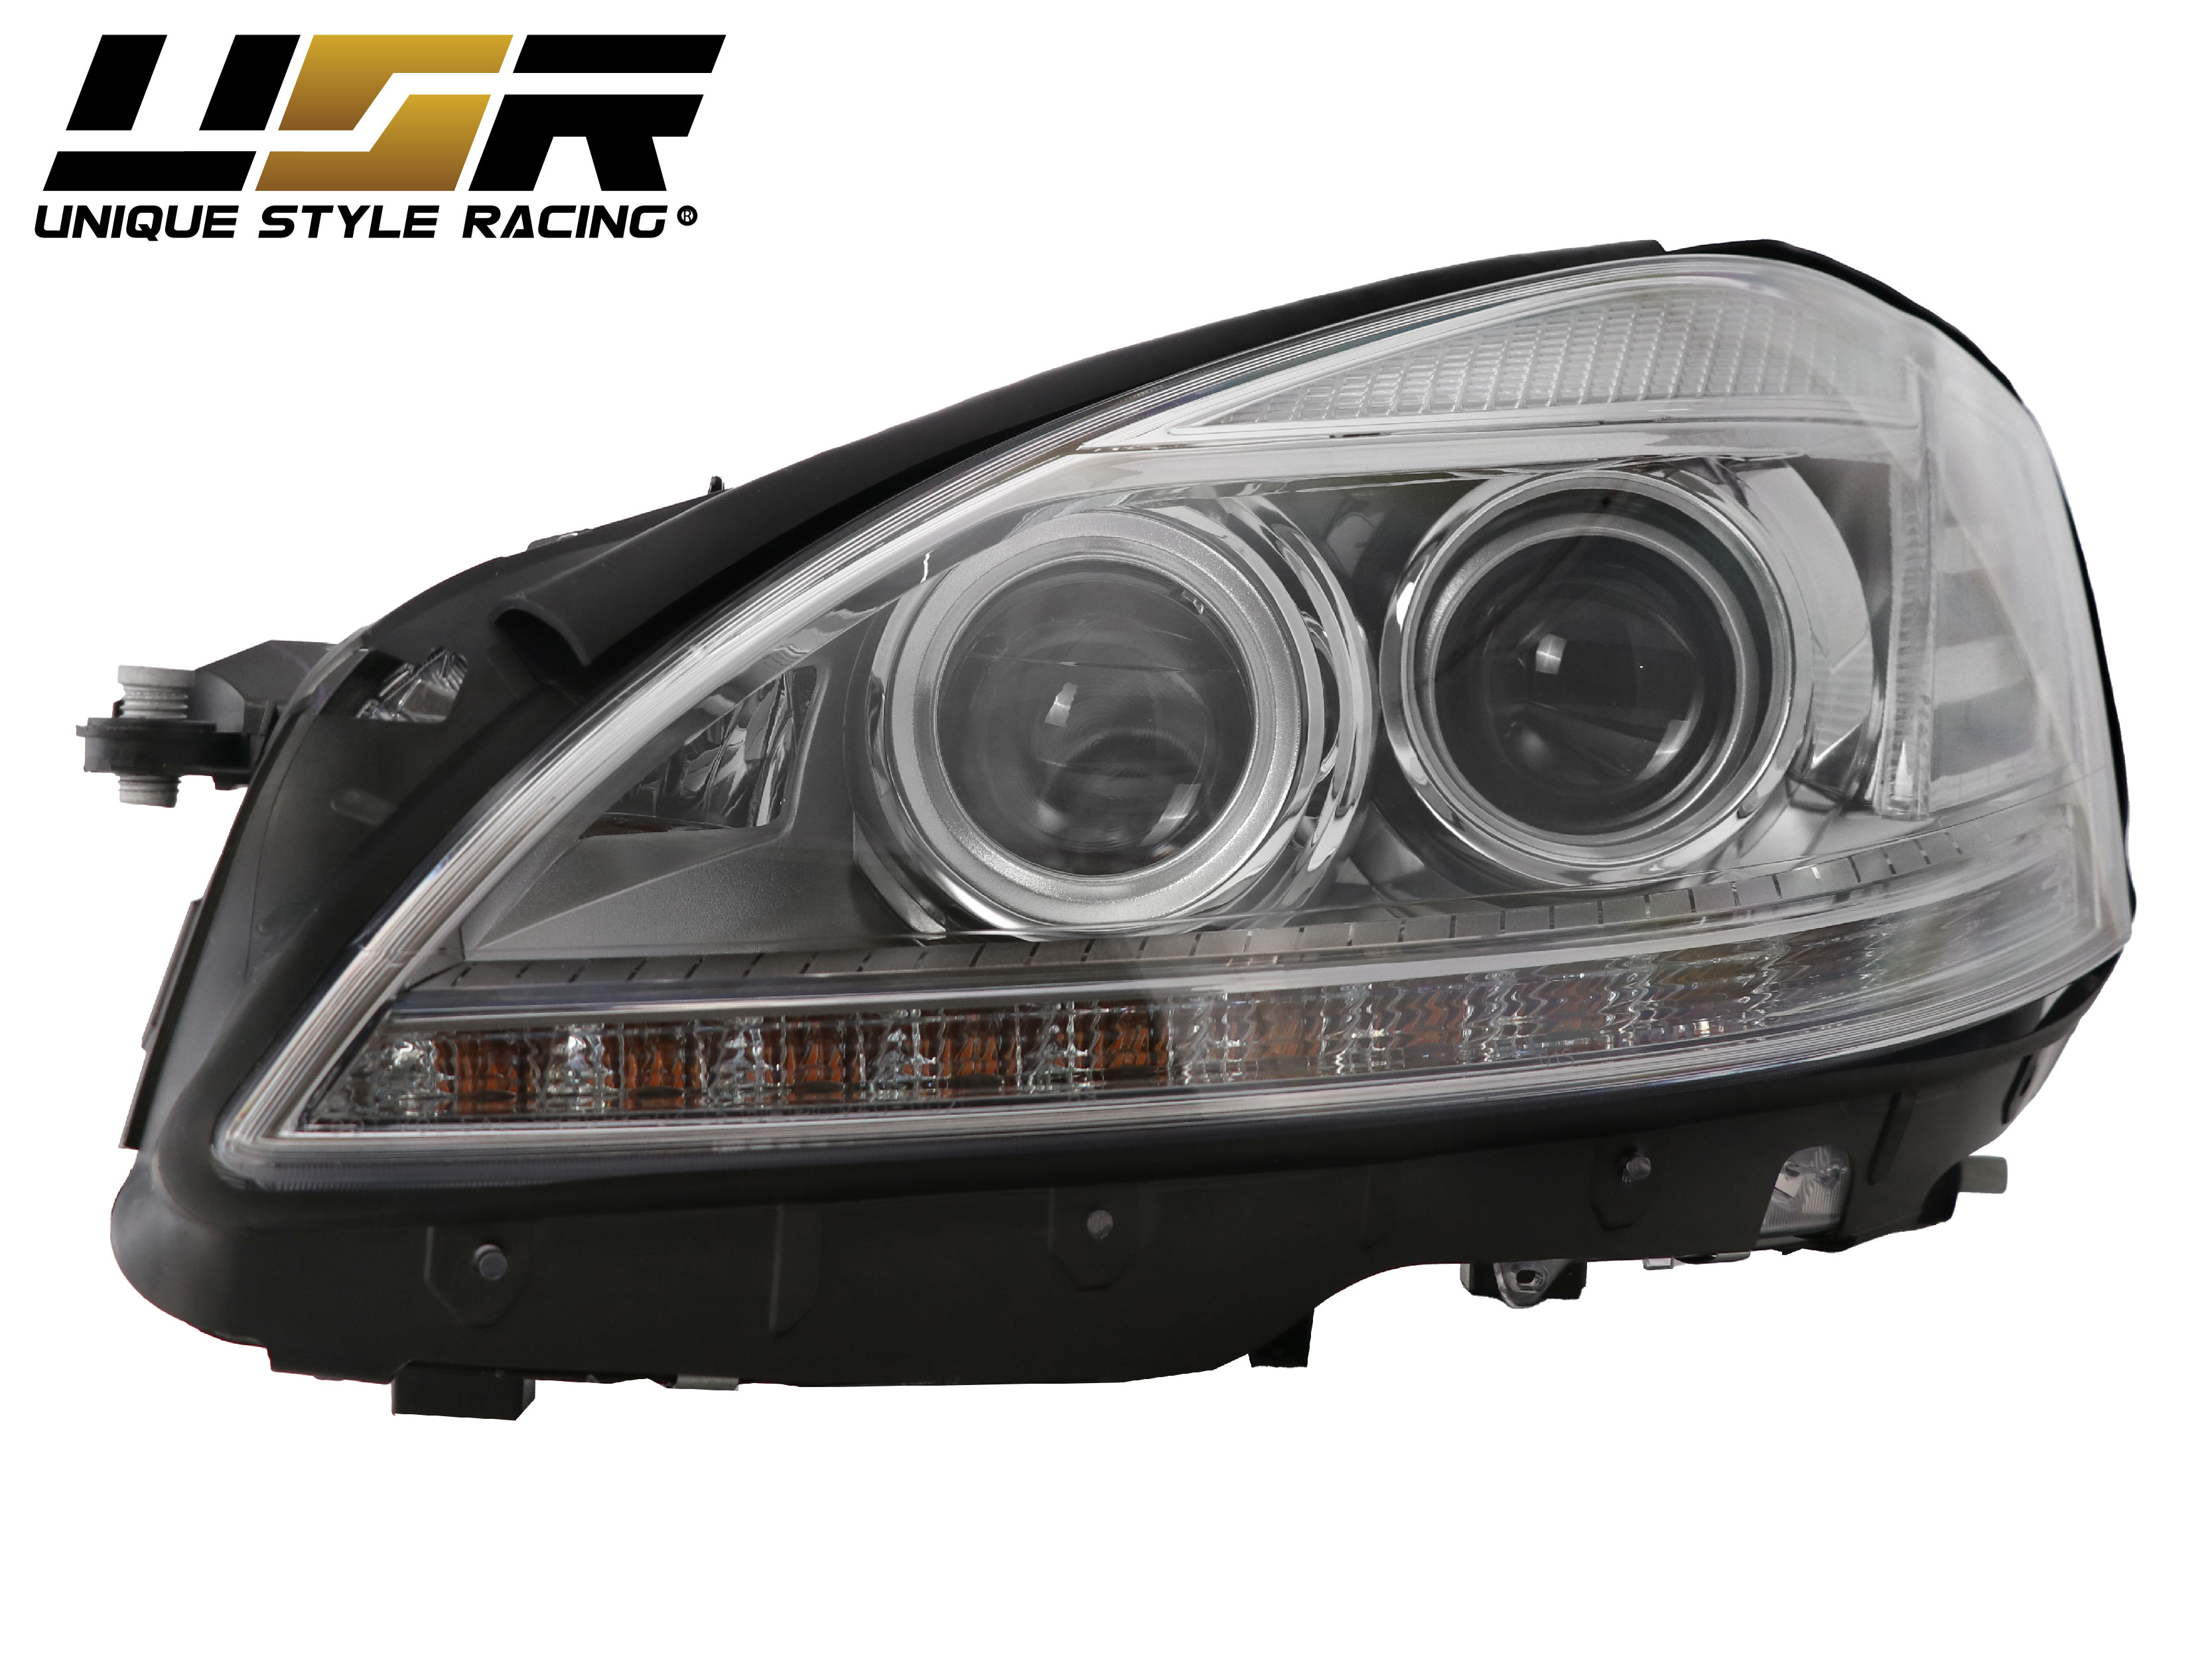 Facelift LED Headlight For 07-09 W221 S Class Stock Bi-Xenon AFS & Night  Vision